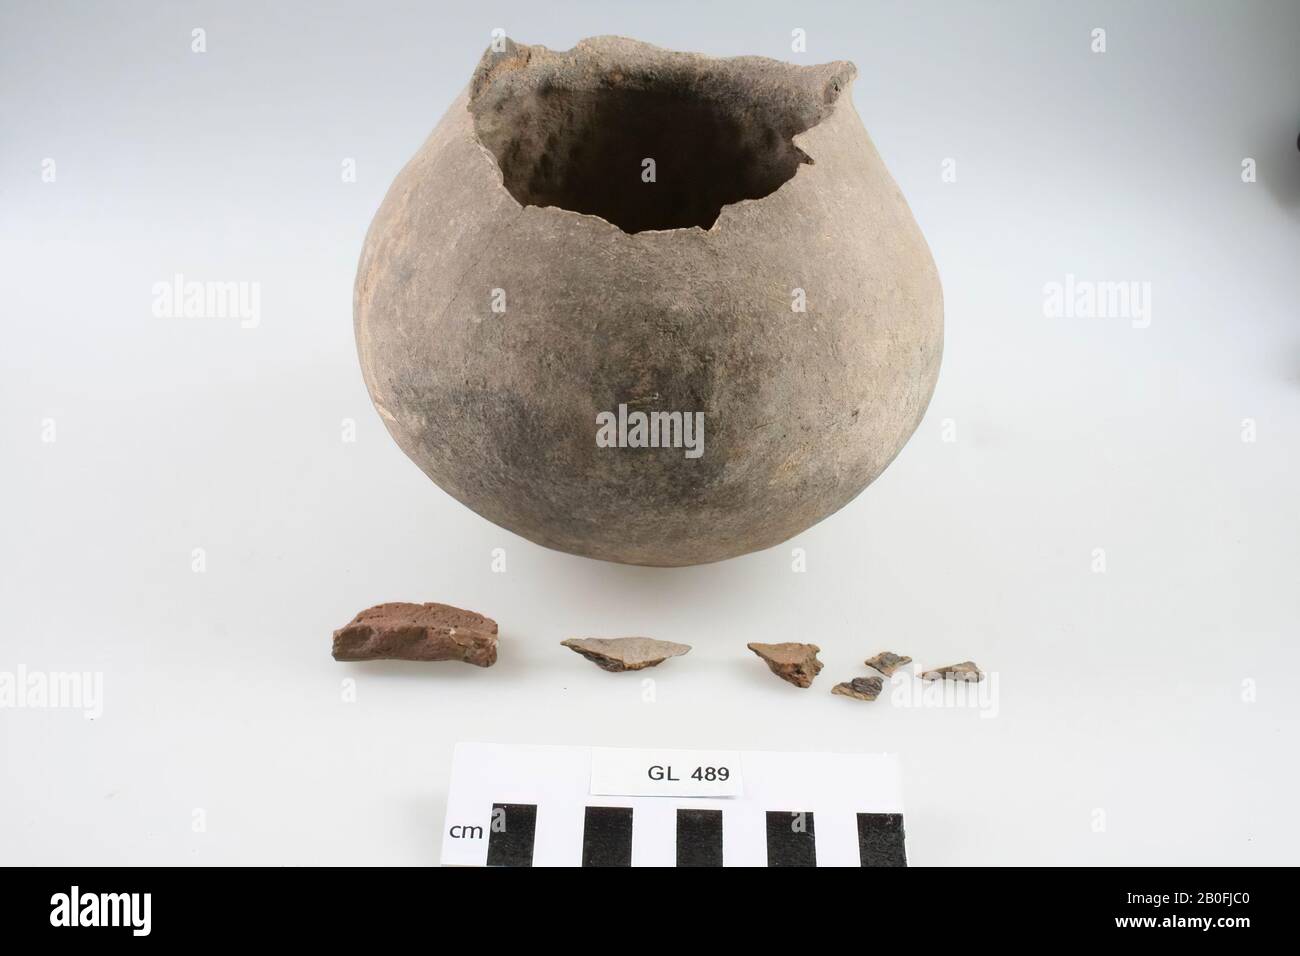 The Netherlands Middle Ages, ball pot, earthenware, hand shaped, h, 14.9 cm, diam, 16.8 cm, lme, the Netherlands, Limburg, Leudal, Horn Stock Photo